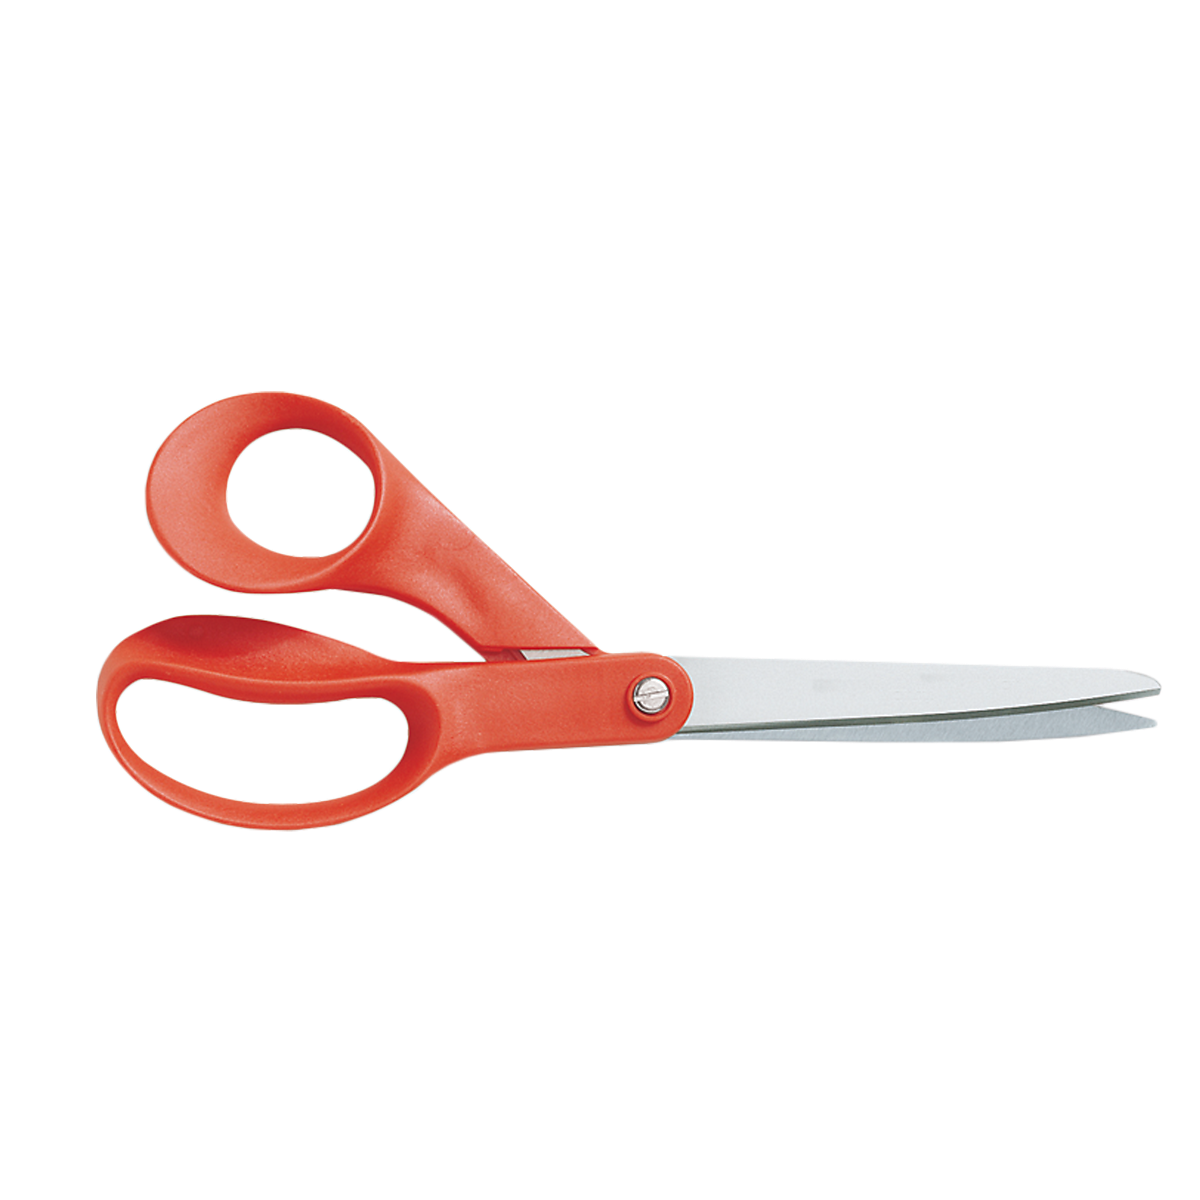 https://rowleycompany.scene7.com/is/image/rowleycompany/rowley-general-purpose-left-hand-scissors-8in-cu8-l?$s7Product$&fmt=png-alpha